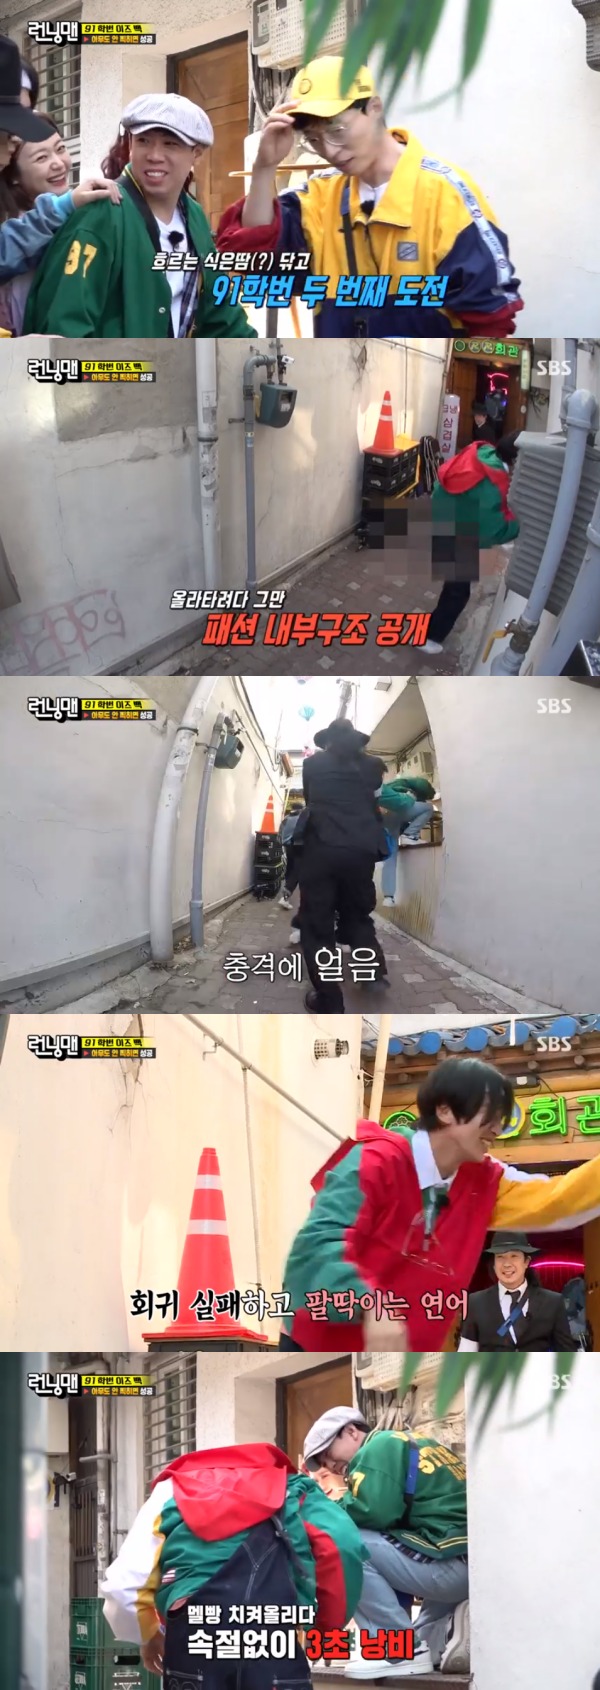 Seoul = = Lee Kwang-soo left humiliating scenes when the suspenders flowed down during the mission.On SBS Running Man broadcasted on the 2nd, 91th Is Back Race was held.The next pre-mission was to identify the type of snack bag-topping, securing gifts as much as the number of people torn vertically as Ji Suk-jin.Yang Se-chan cut horizontally to the Scissors; Jeon So-min also used the Scissors; the Scissors, who were placed with the snacks, confused the members.Yoo Jae-Suk, Kim Jong-kook wrote Scissors; Ji Suk-jin resented, Why does a good kid write Scissors?Haha noticed the mission for the first time and was troubled. She exchanged glances with the members, but opened them horizontally.No one was successful using the Scissors until the remaining Song Ji Hyo and Lee Kwang-soo.The third memory was frozen pork belly; Ji Suk-jin ate frozen pork belly as if he was hungry.The members were busy teasing Ji Suk-jin, who was obsessed with frozen pork belly; the next mission was hiding in three seconds and not appearing in group photos.Every time I failed, I deducted one gift. After the rehearsal, I made my first attempt.But as Lee Kwang-soos suspenders ran down, his underwear was exposed.In the next attempt, Ji Suk-jin and Kim Jong-kook were caught on camera; Ji Suk-jin was also captured on camera in the third attempt.After a repeated failure, he succeeded in the sixth time and secured three gifts.